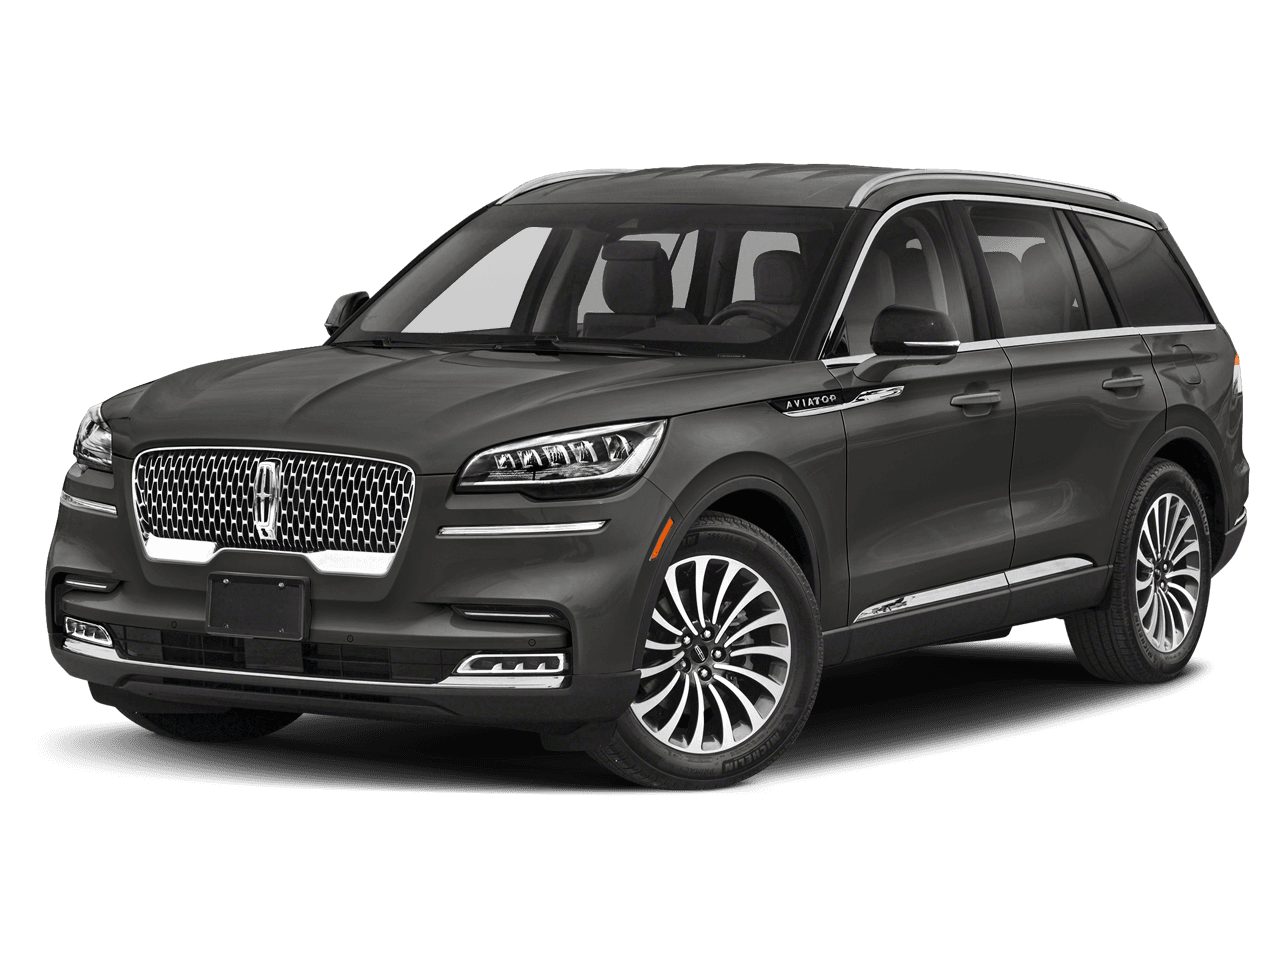 2021 Lincoln Aviator Photo in Bethesda, MD 20814